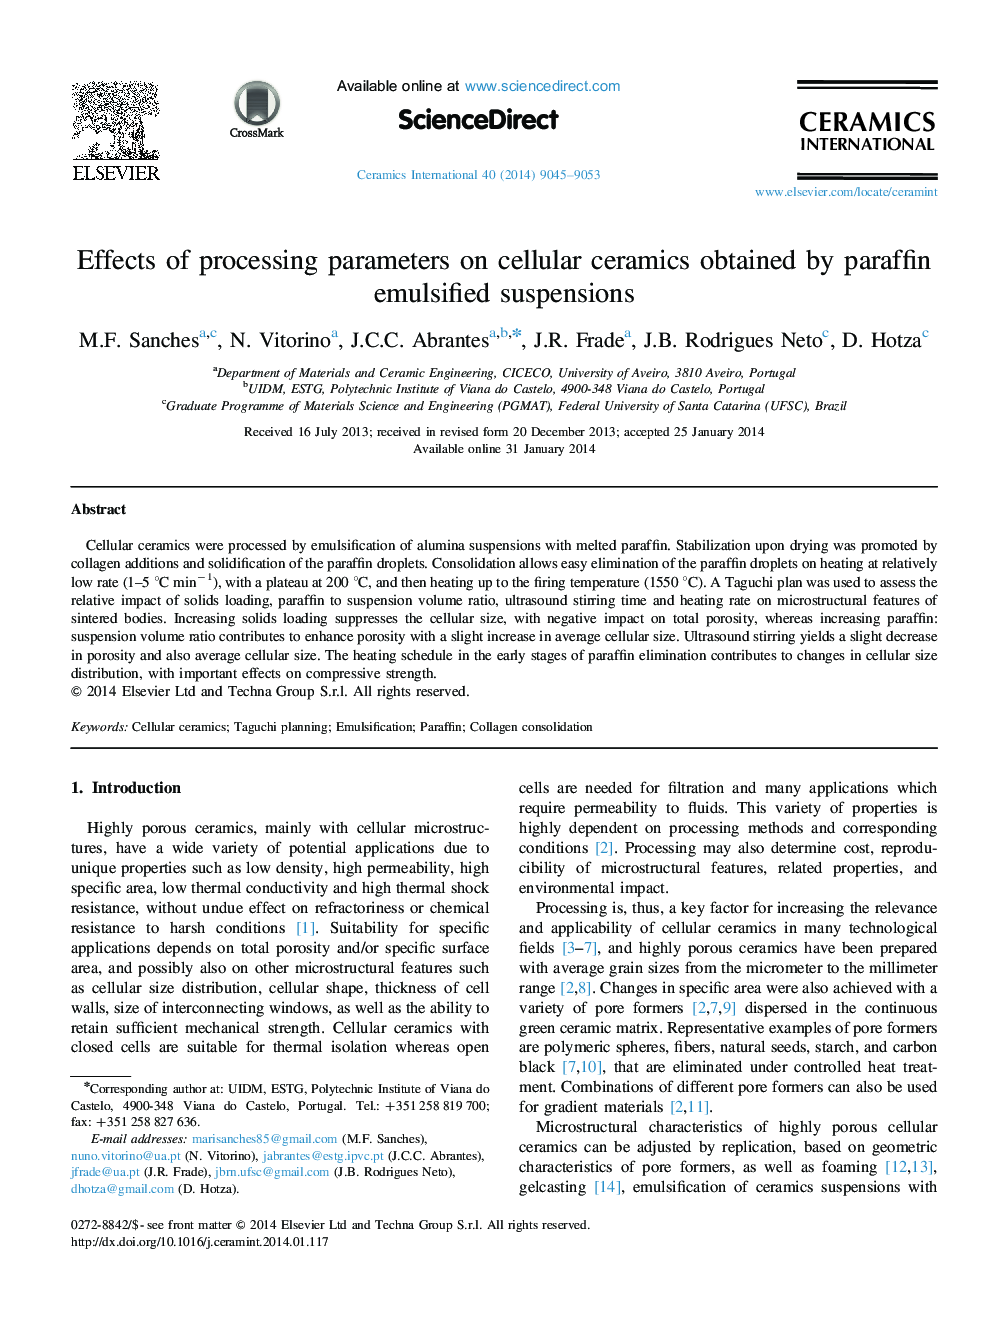 Effects of processing parameters on cellular ceramics obtained by paraffin emulsified suspensions